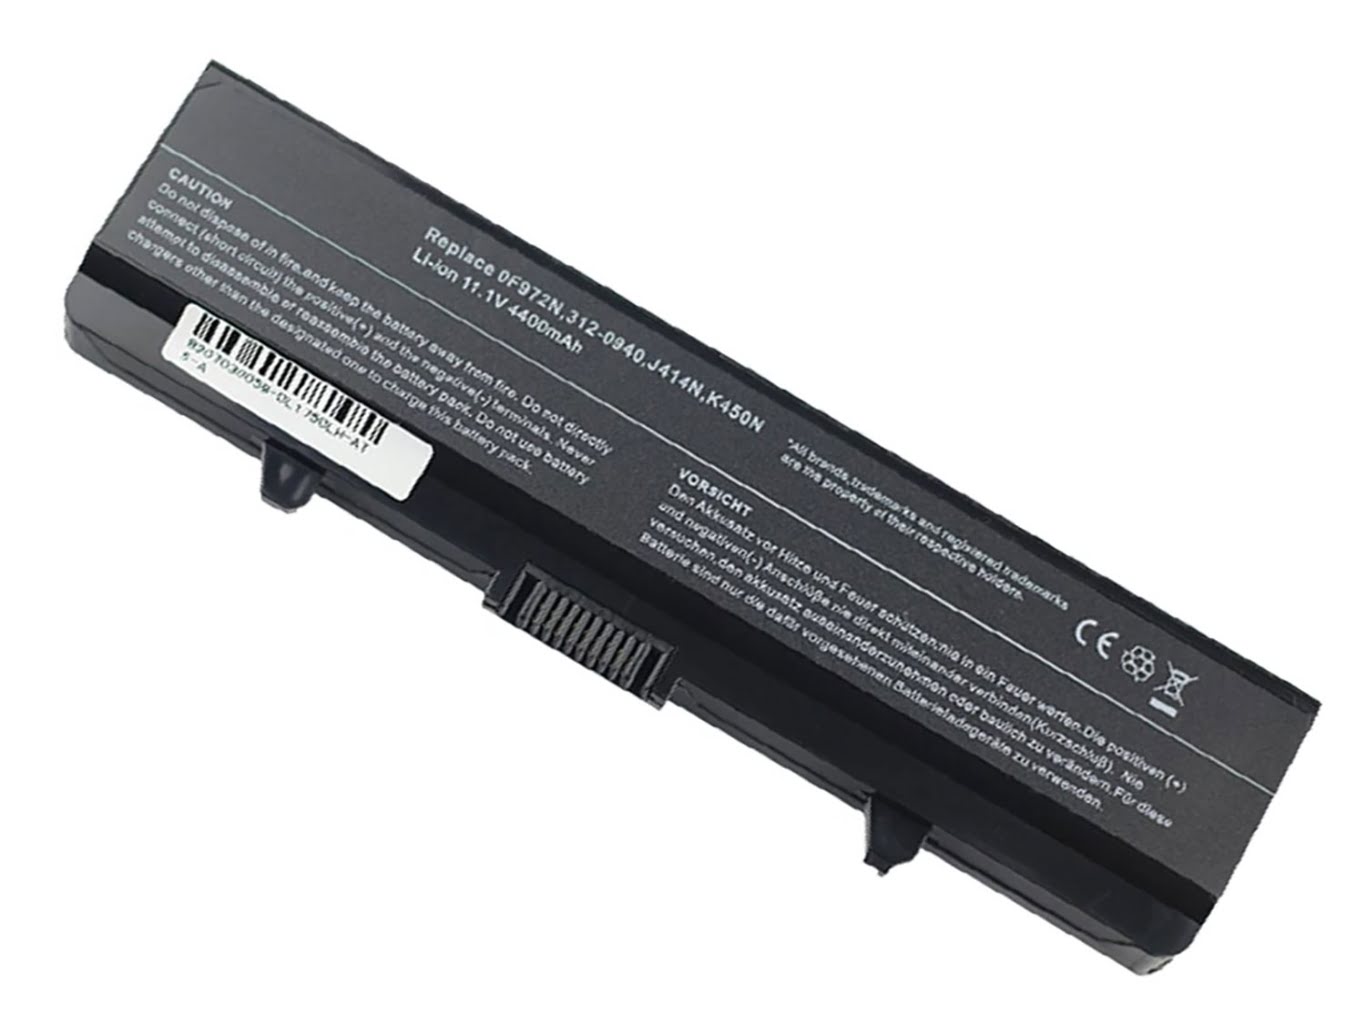 0F972N, 0G558N replacement Laptop Battery for Dell Inspiron 1440, Inspiron 1440n